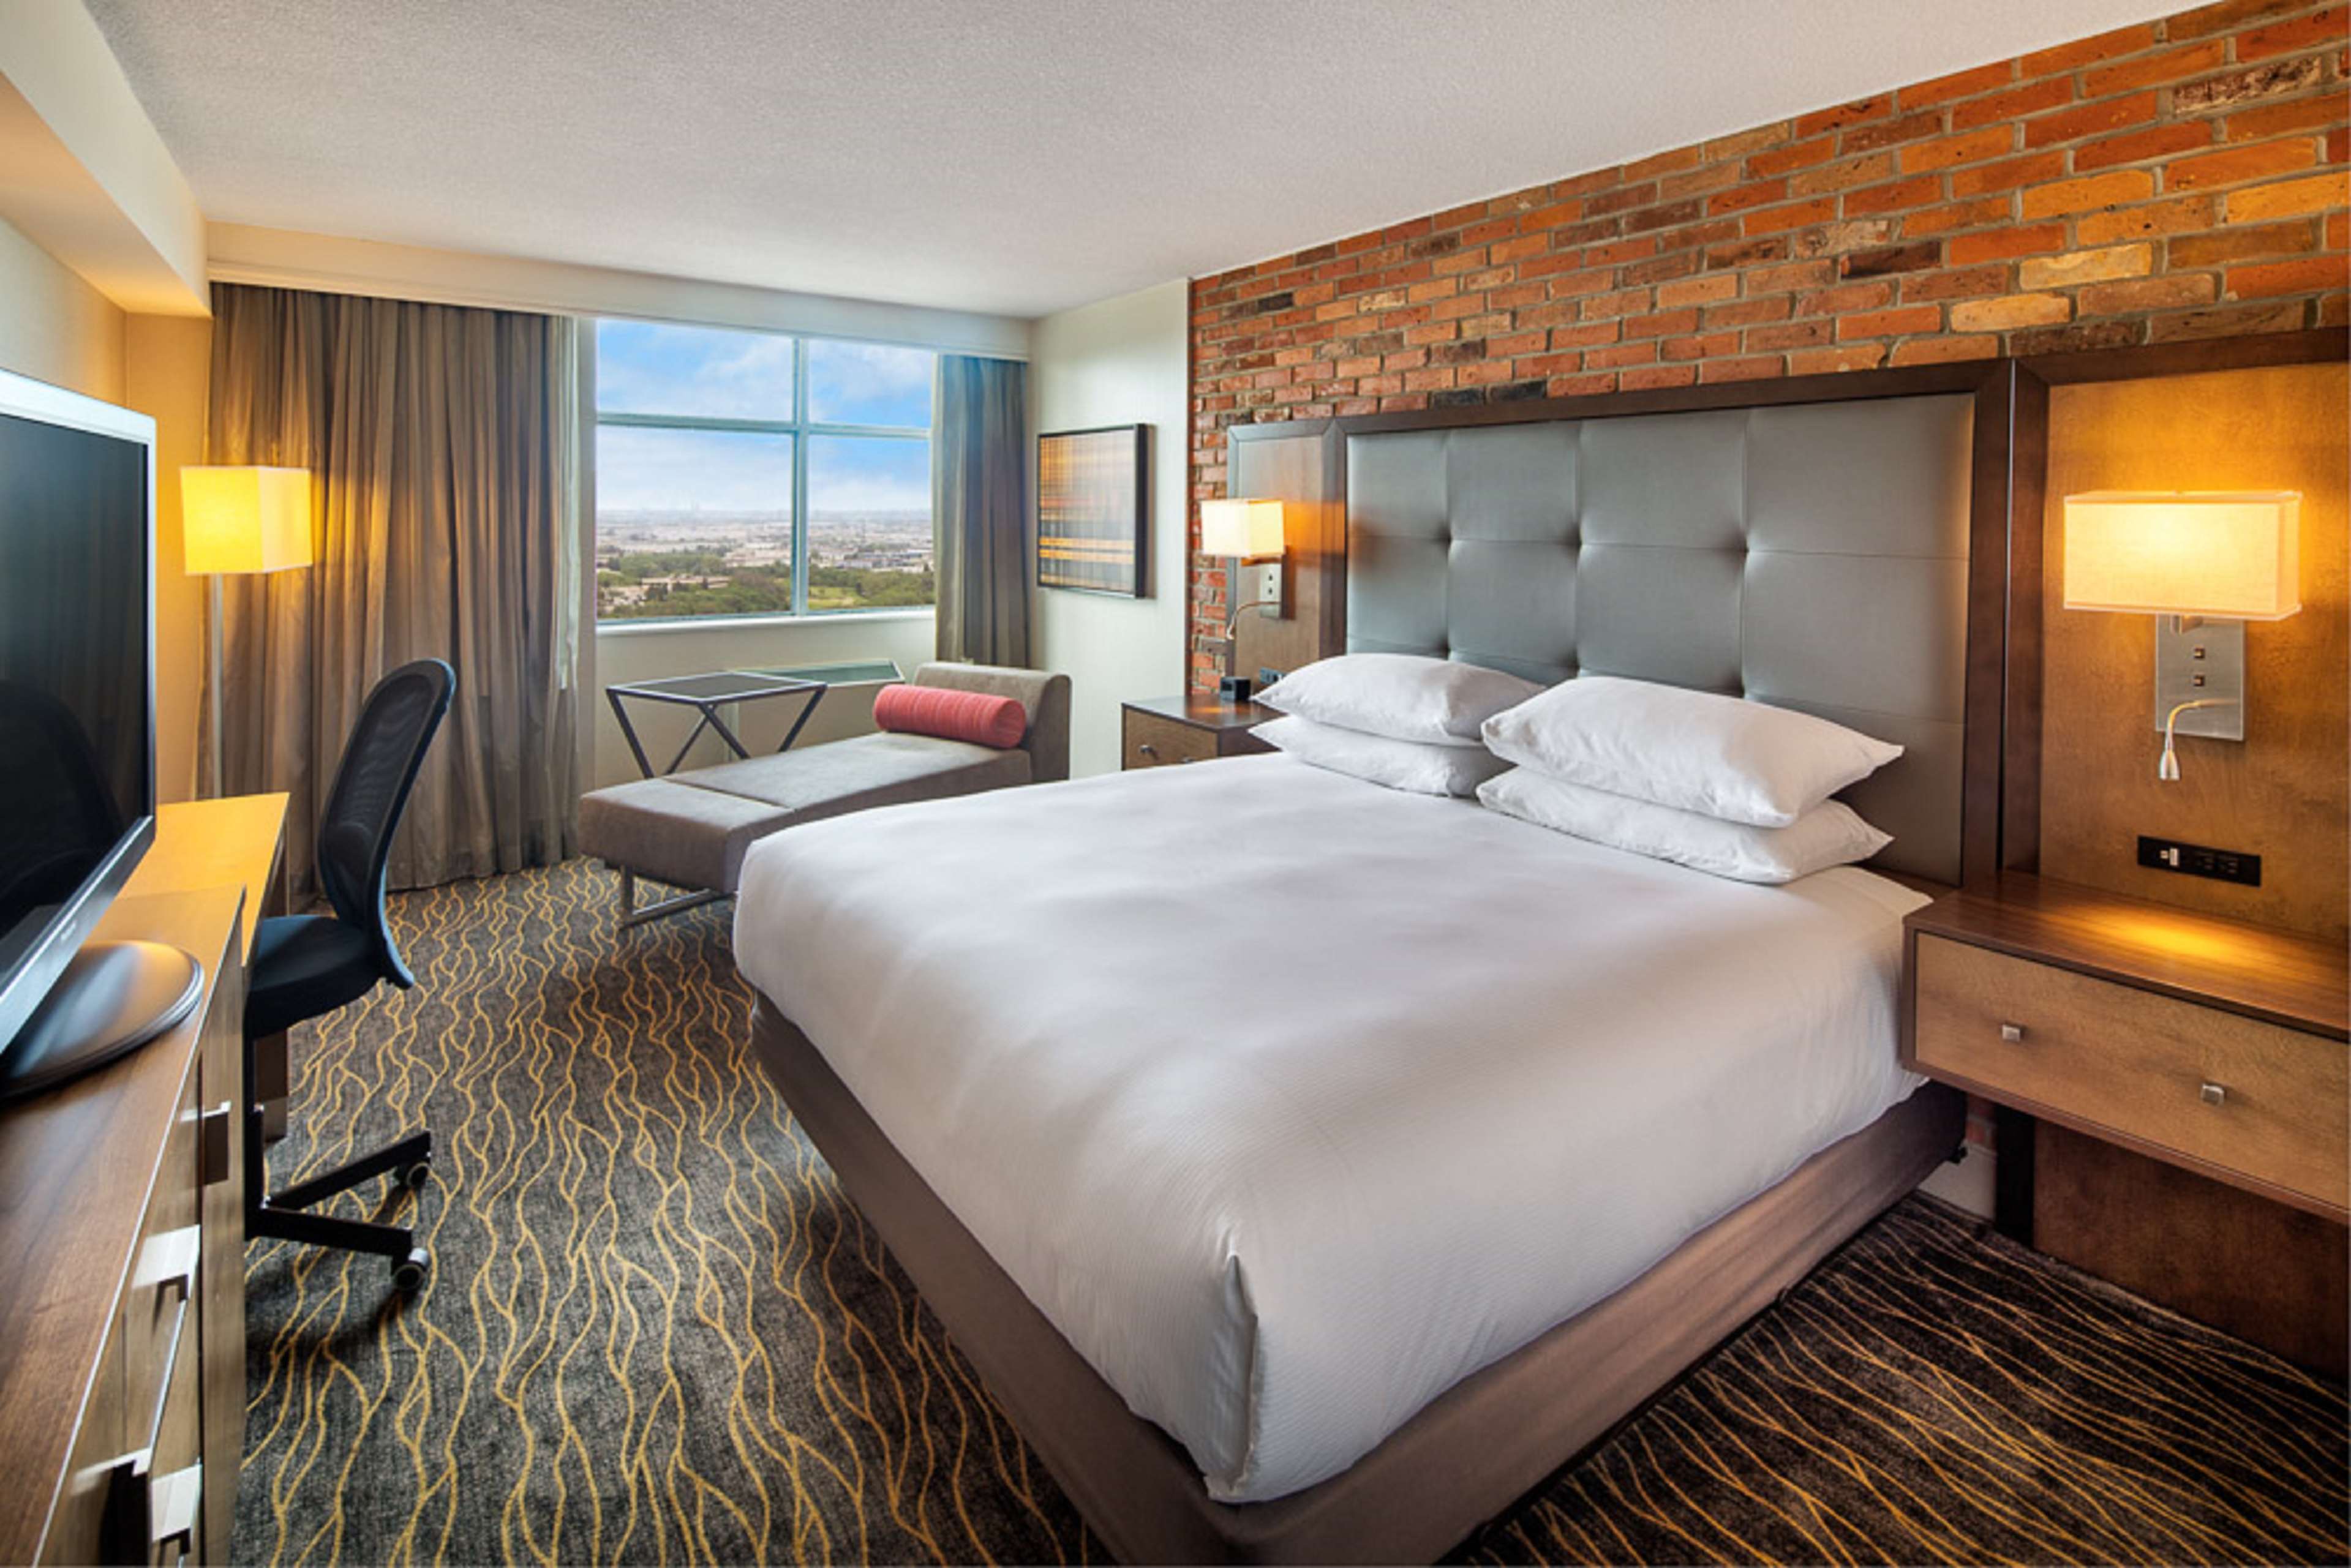 Images DoubleTree by Hilton Toronto Airport